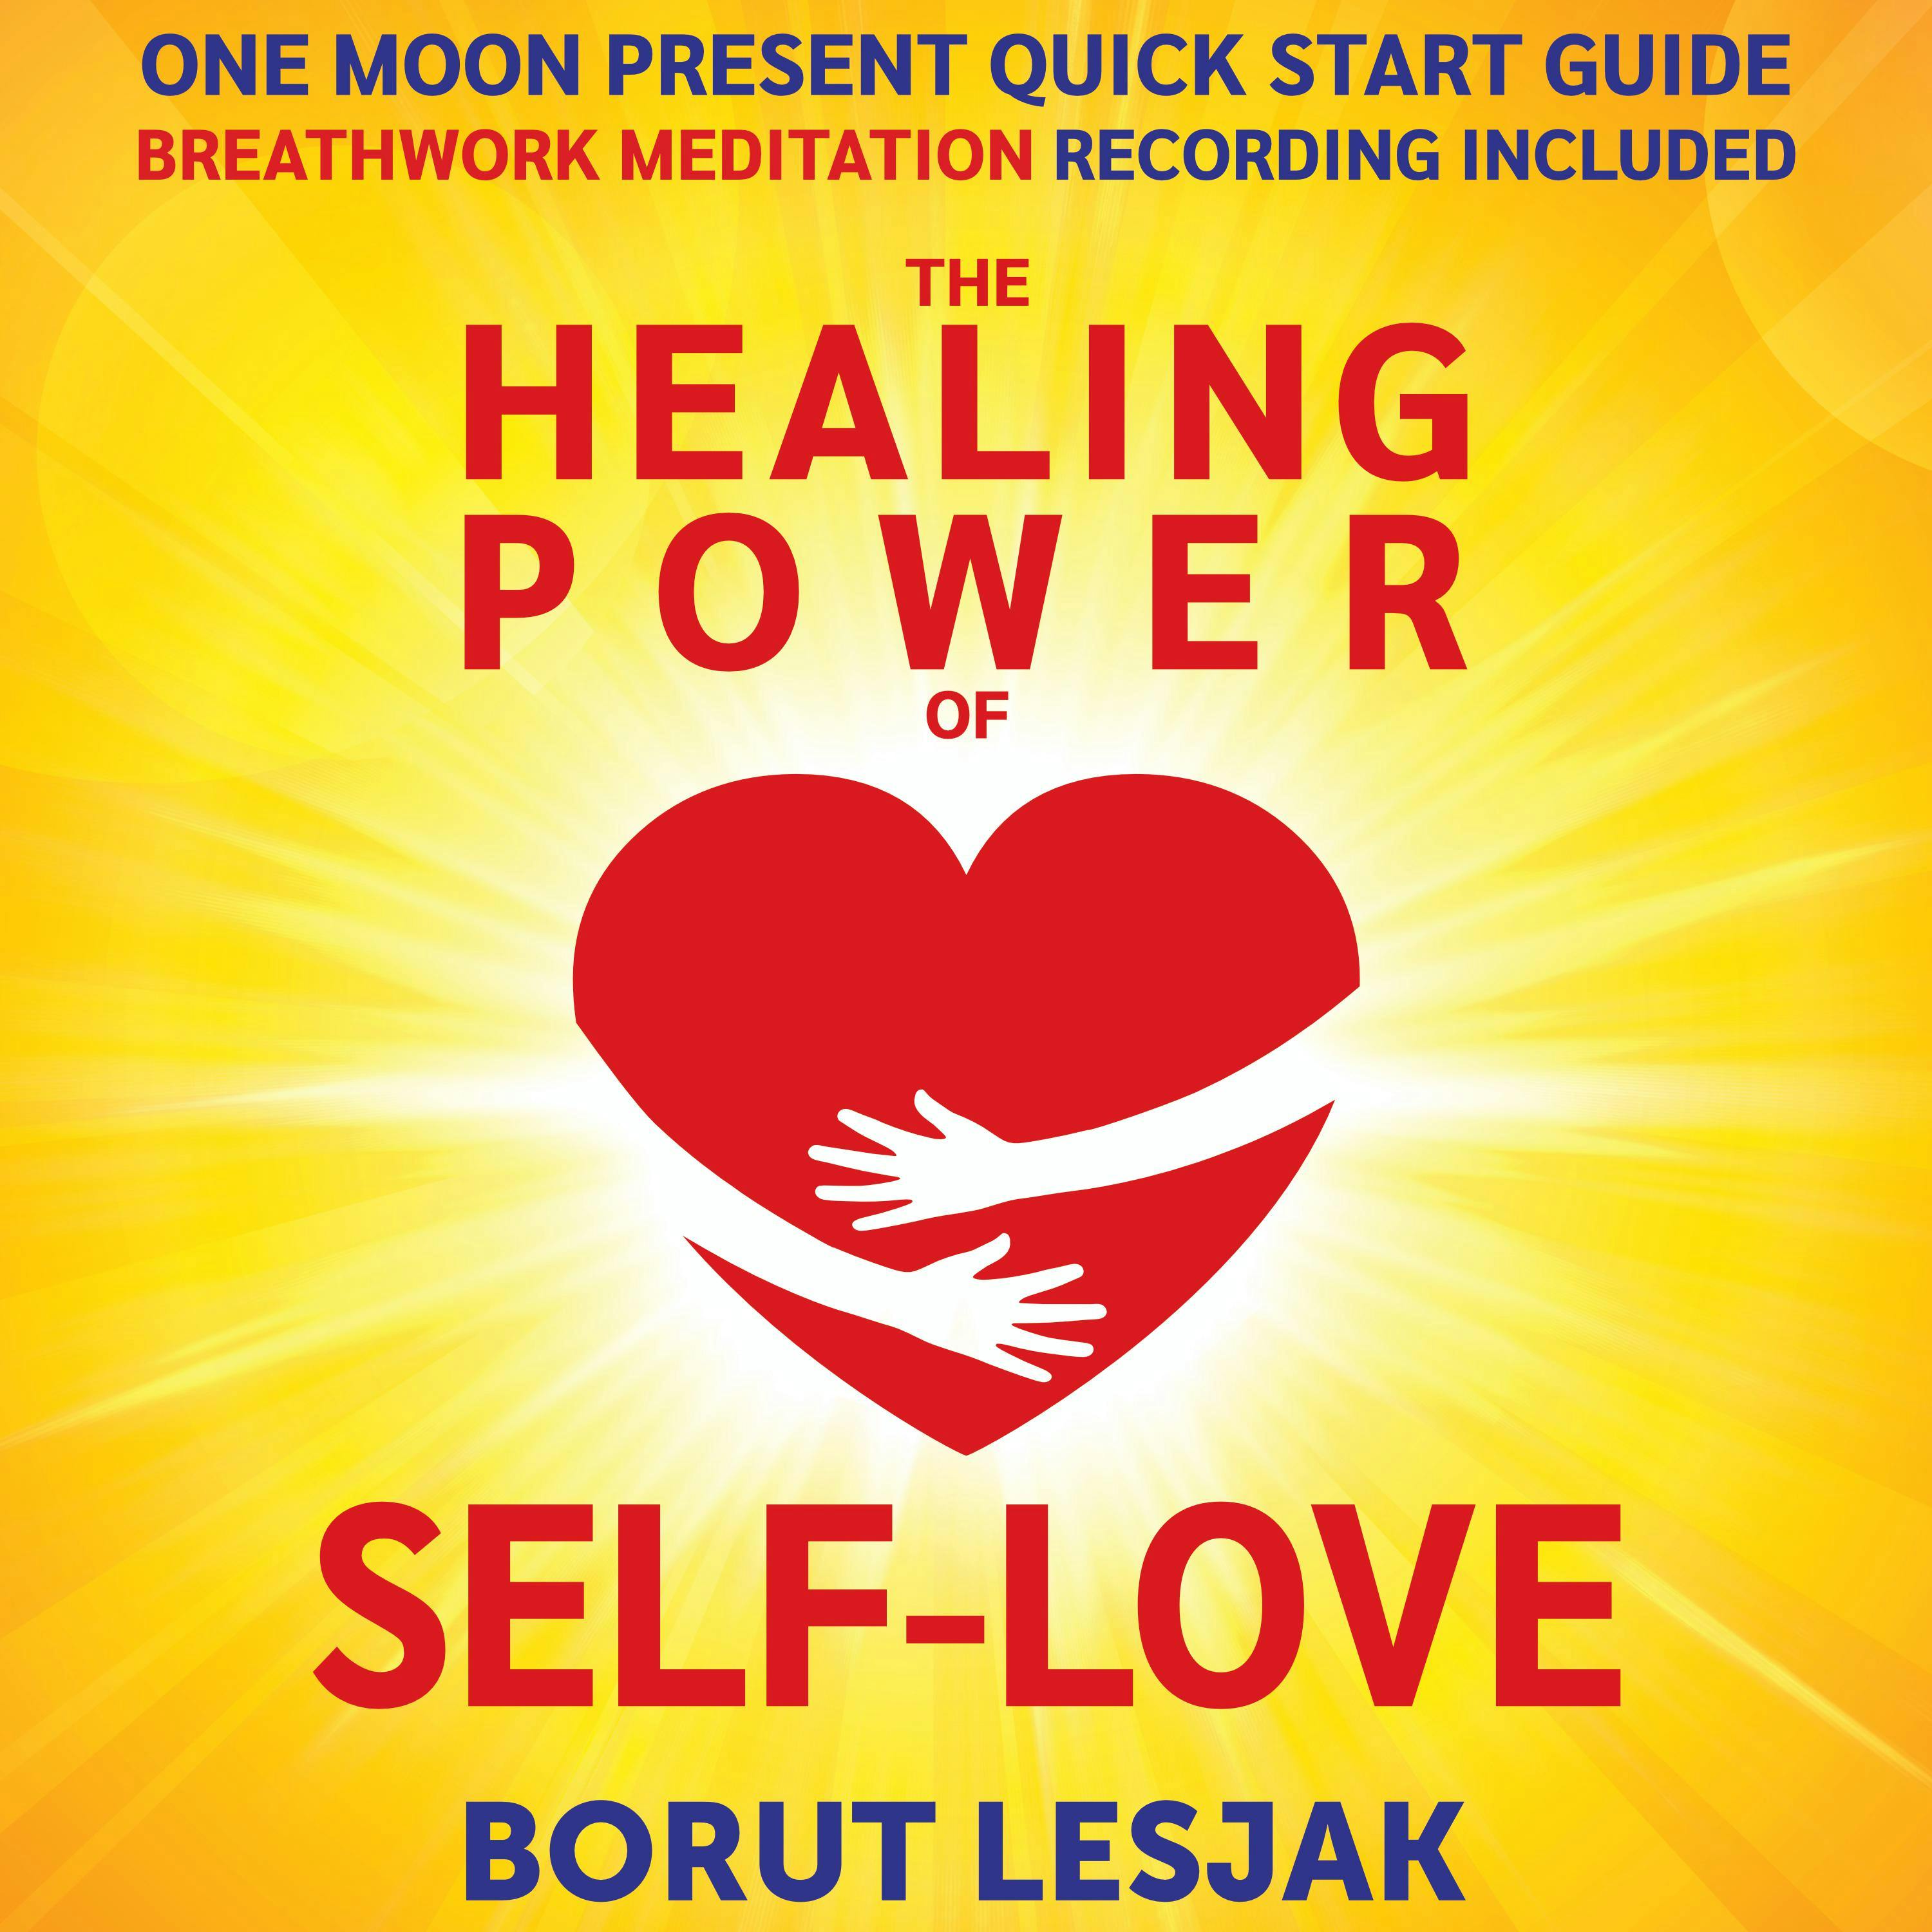 One Moon Present Quick Start Guide: A Radical Healing Formula to Transform Your Life in 28 Days: The Healing Power of Self-Love - undefined